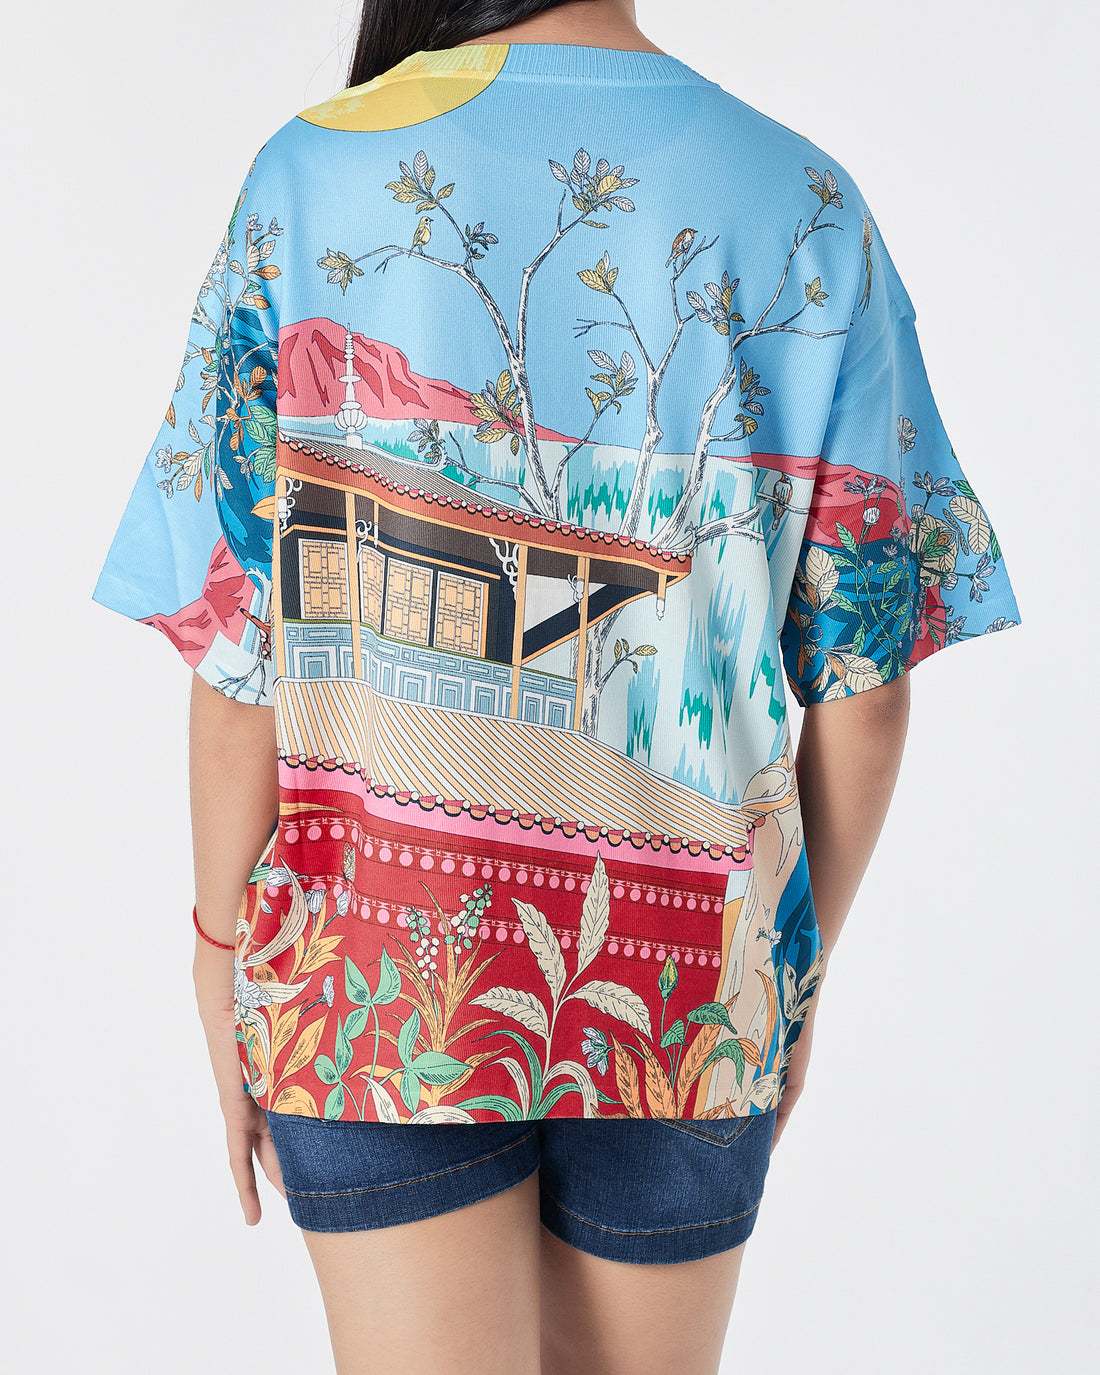 House Painting Lady  T-Shirt 15.90